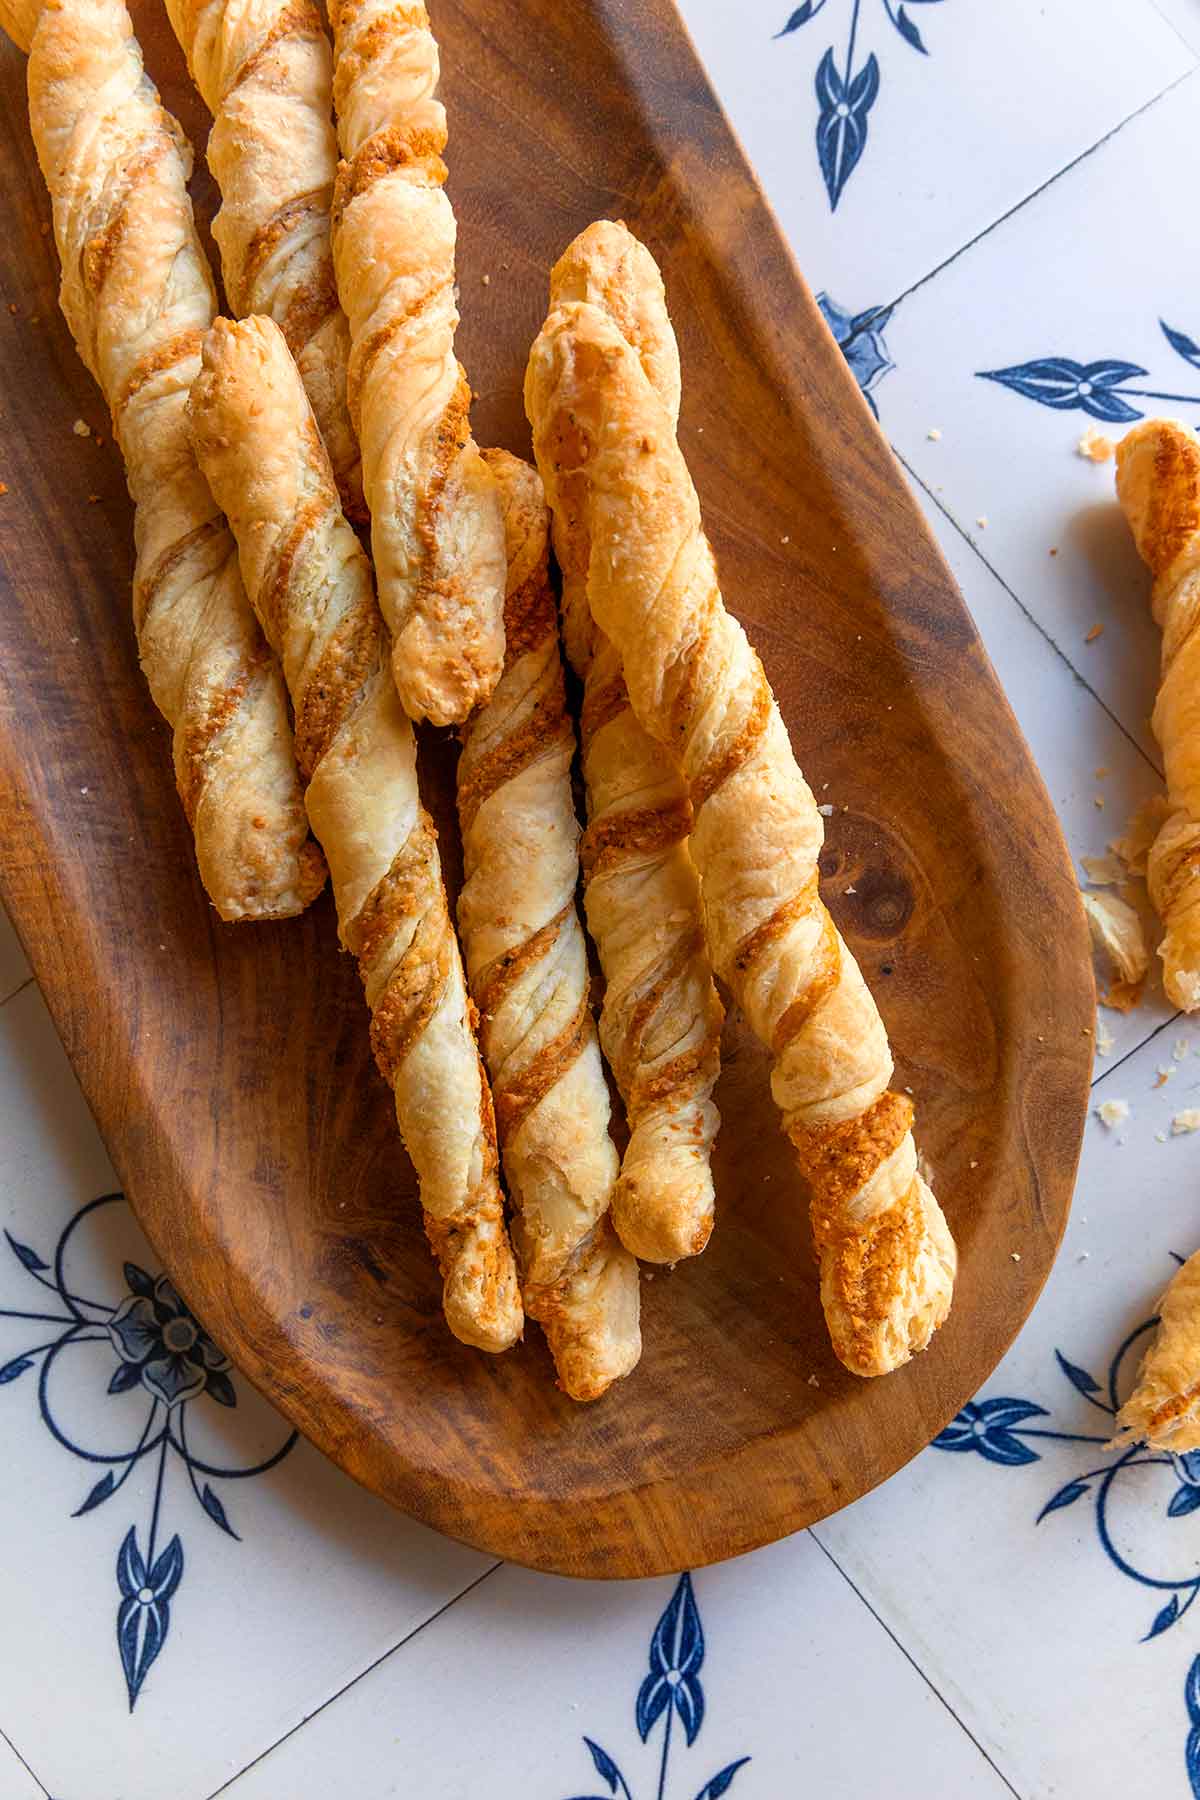 Cheese straws on a wooden oval platter on a blue and white tiled background.